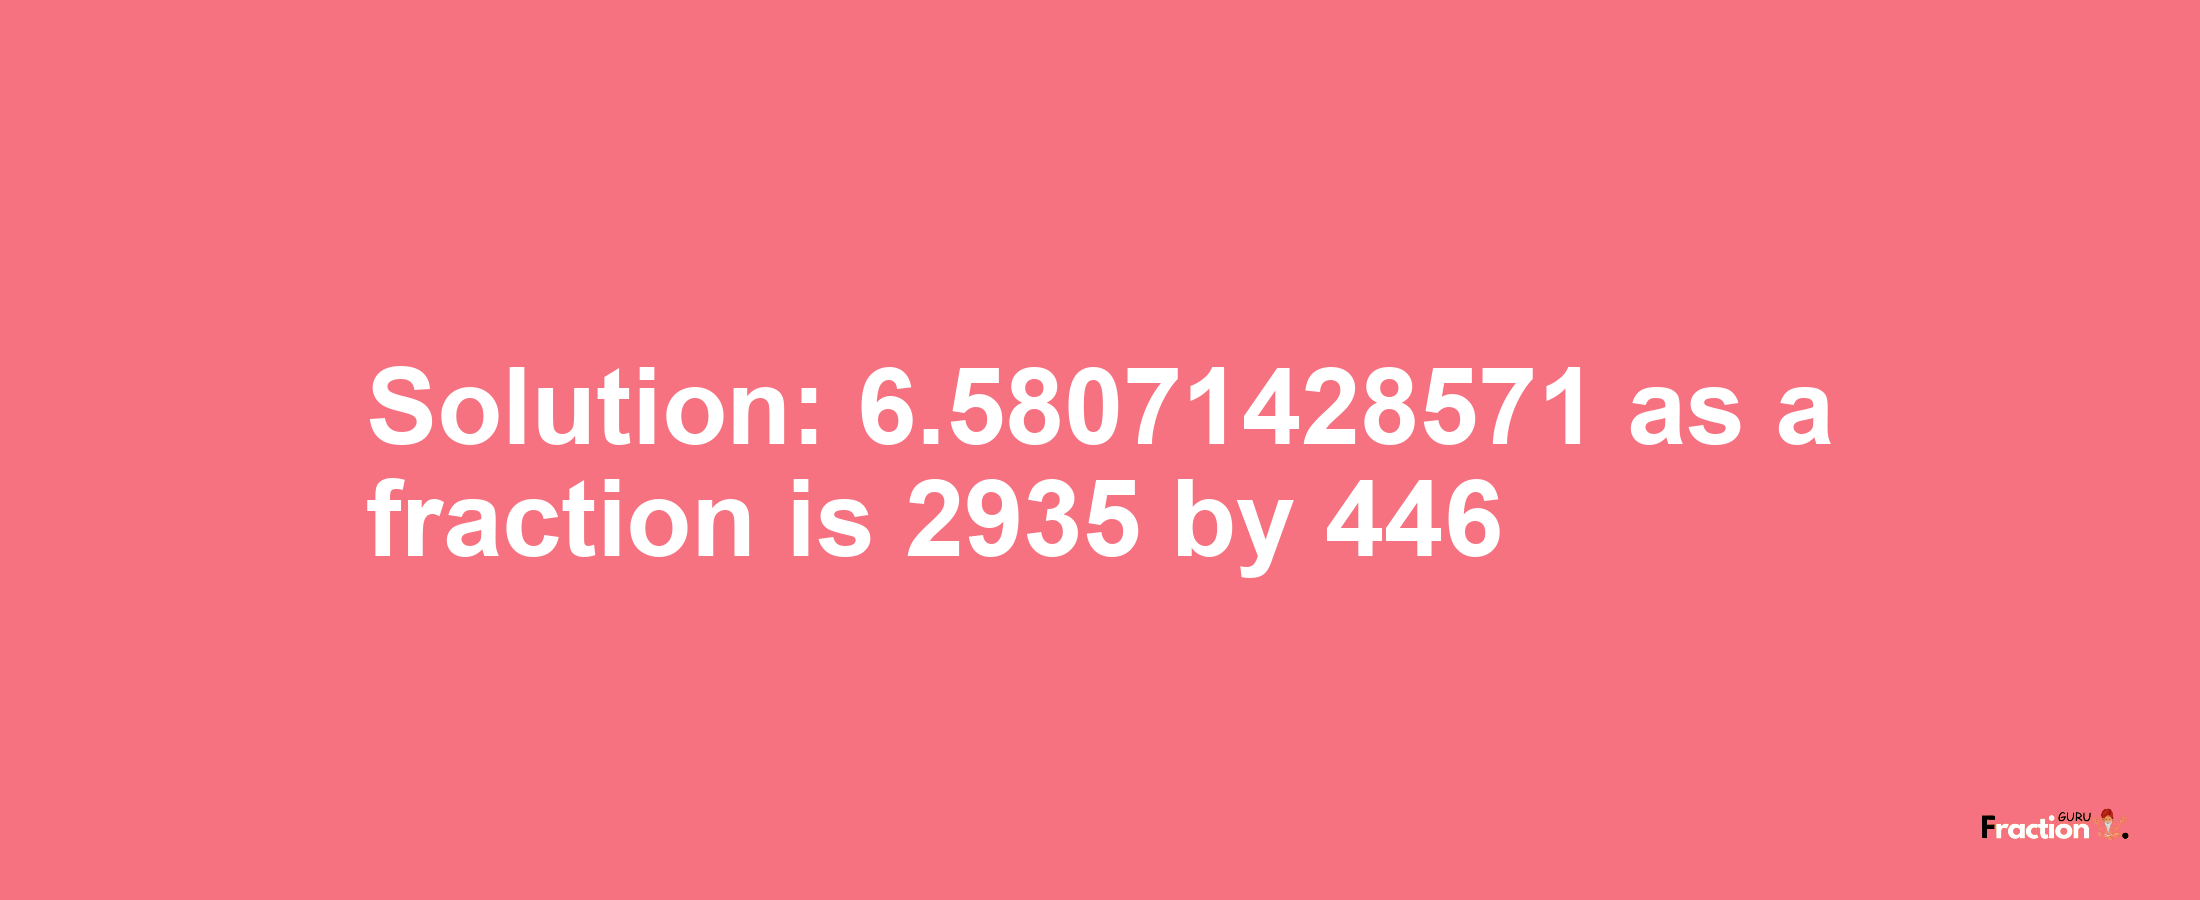 Solution:6.58071428571 as a fraction is 2935/446